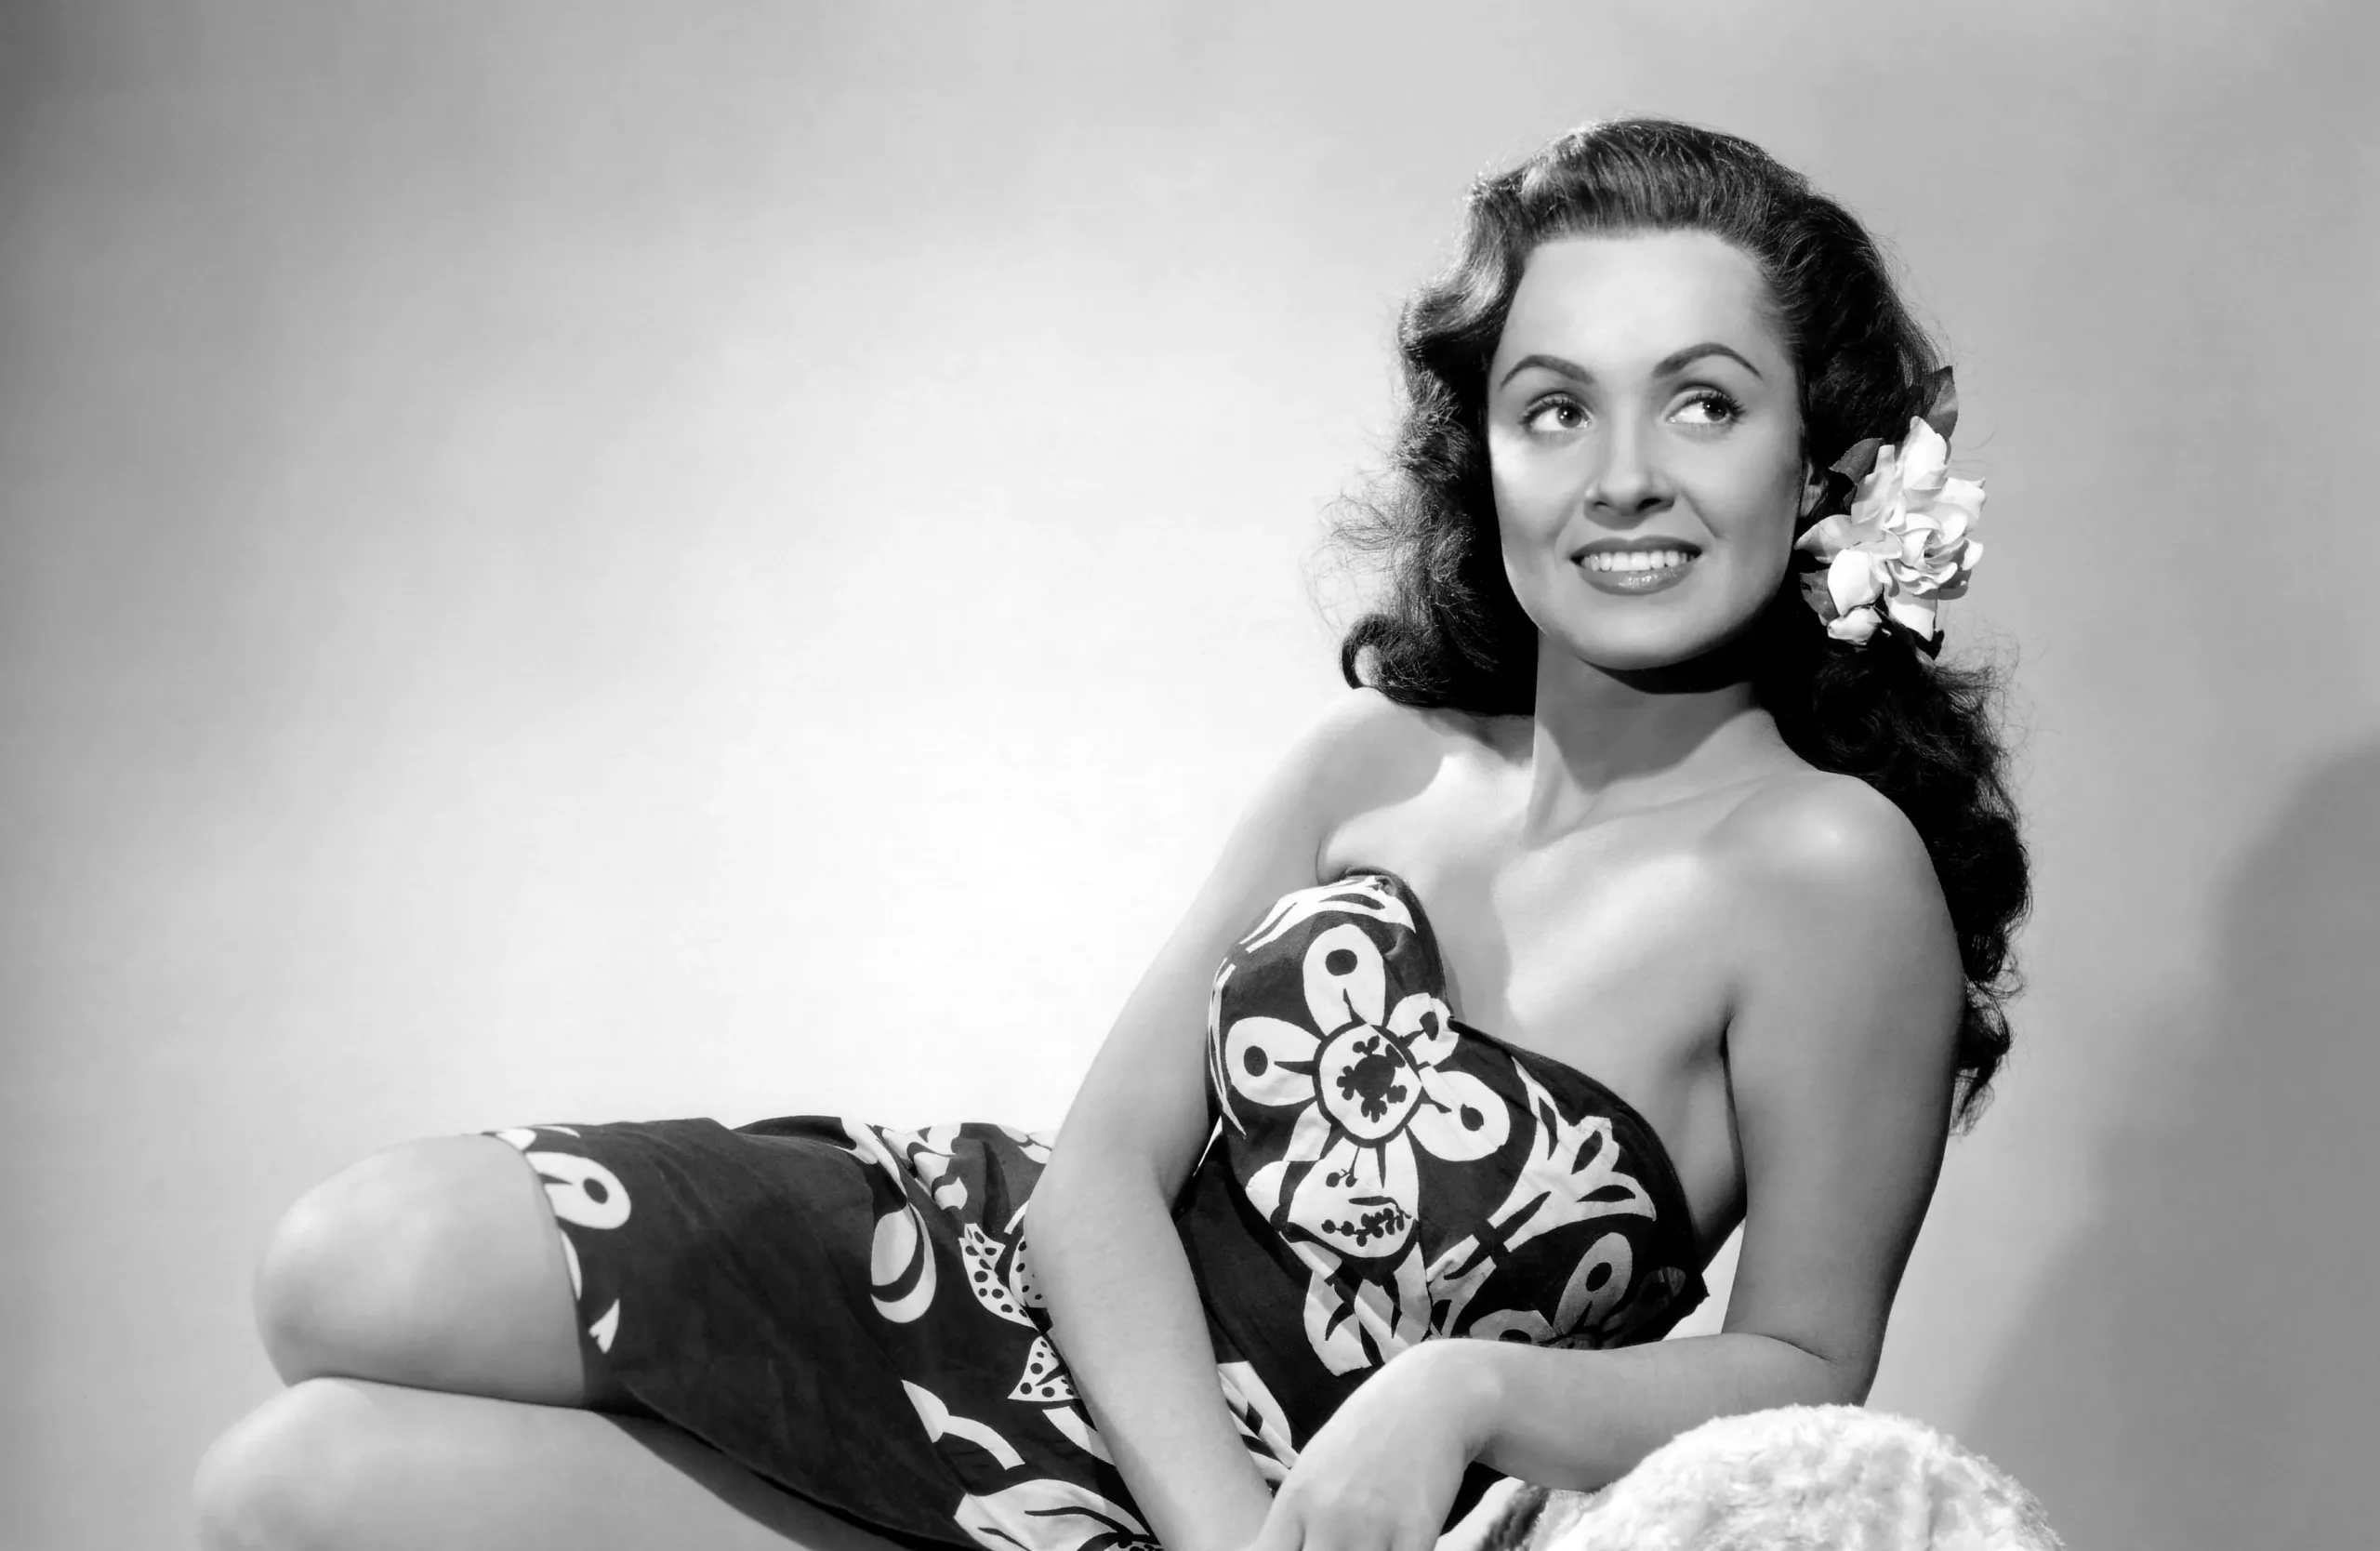 Actress Susan Cabot Was Mercilessly Killed at 59 by Her Only Son Who Accused Her of Attacking First!